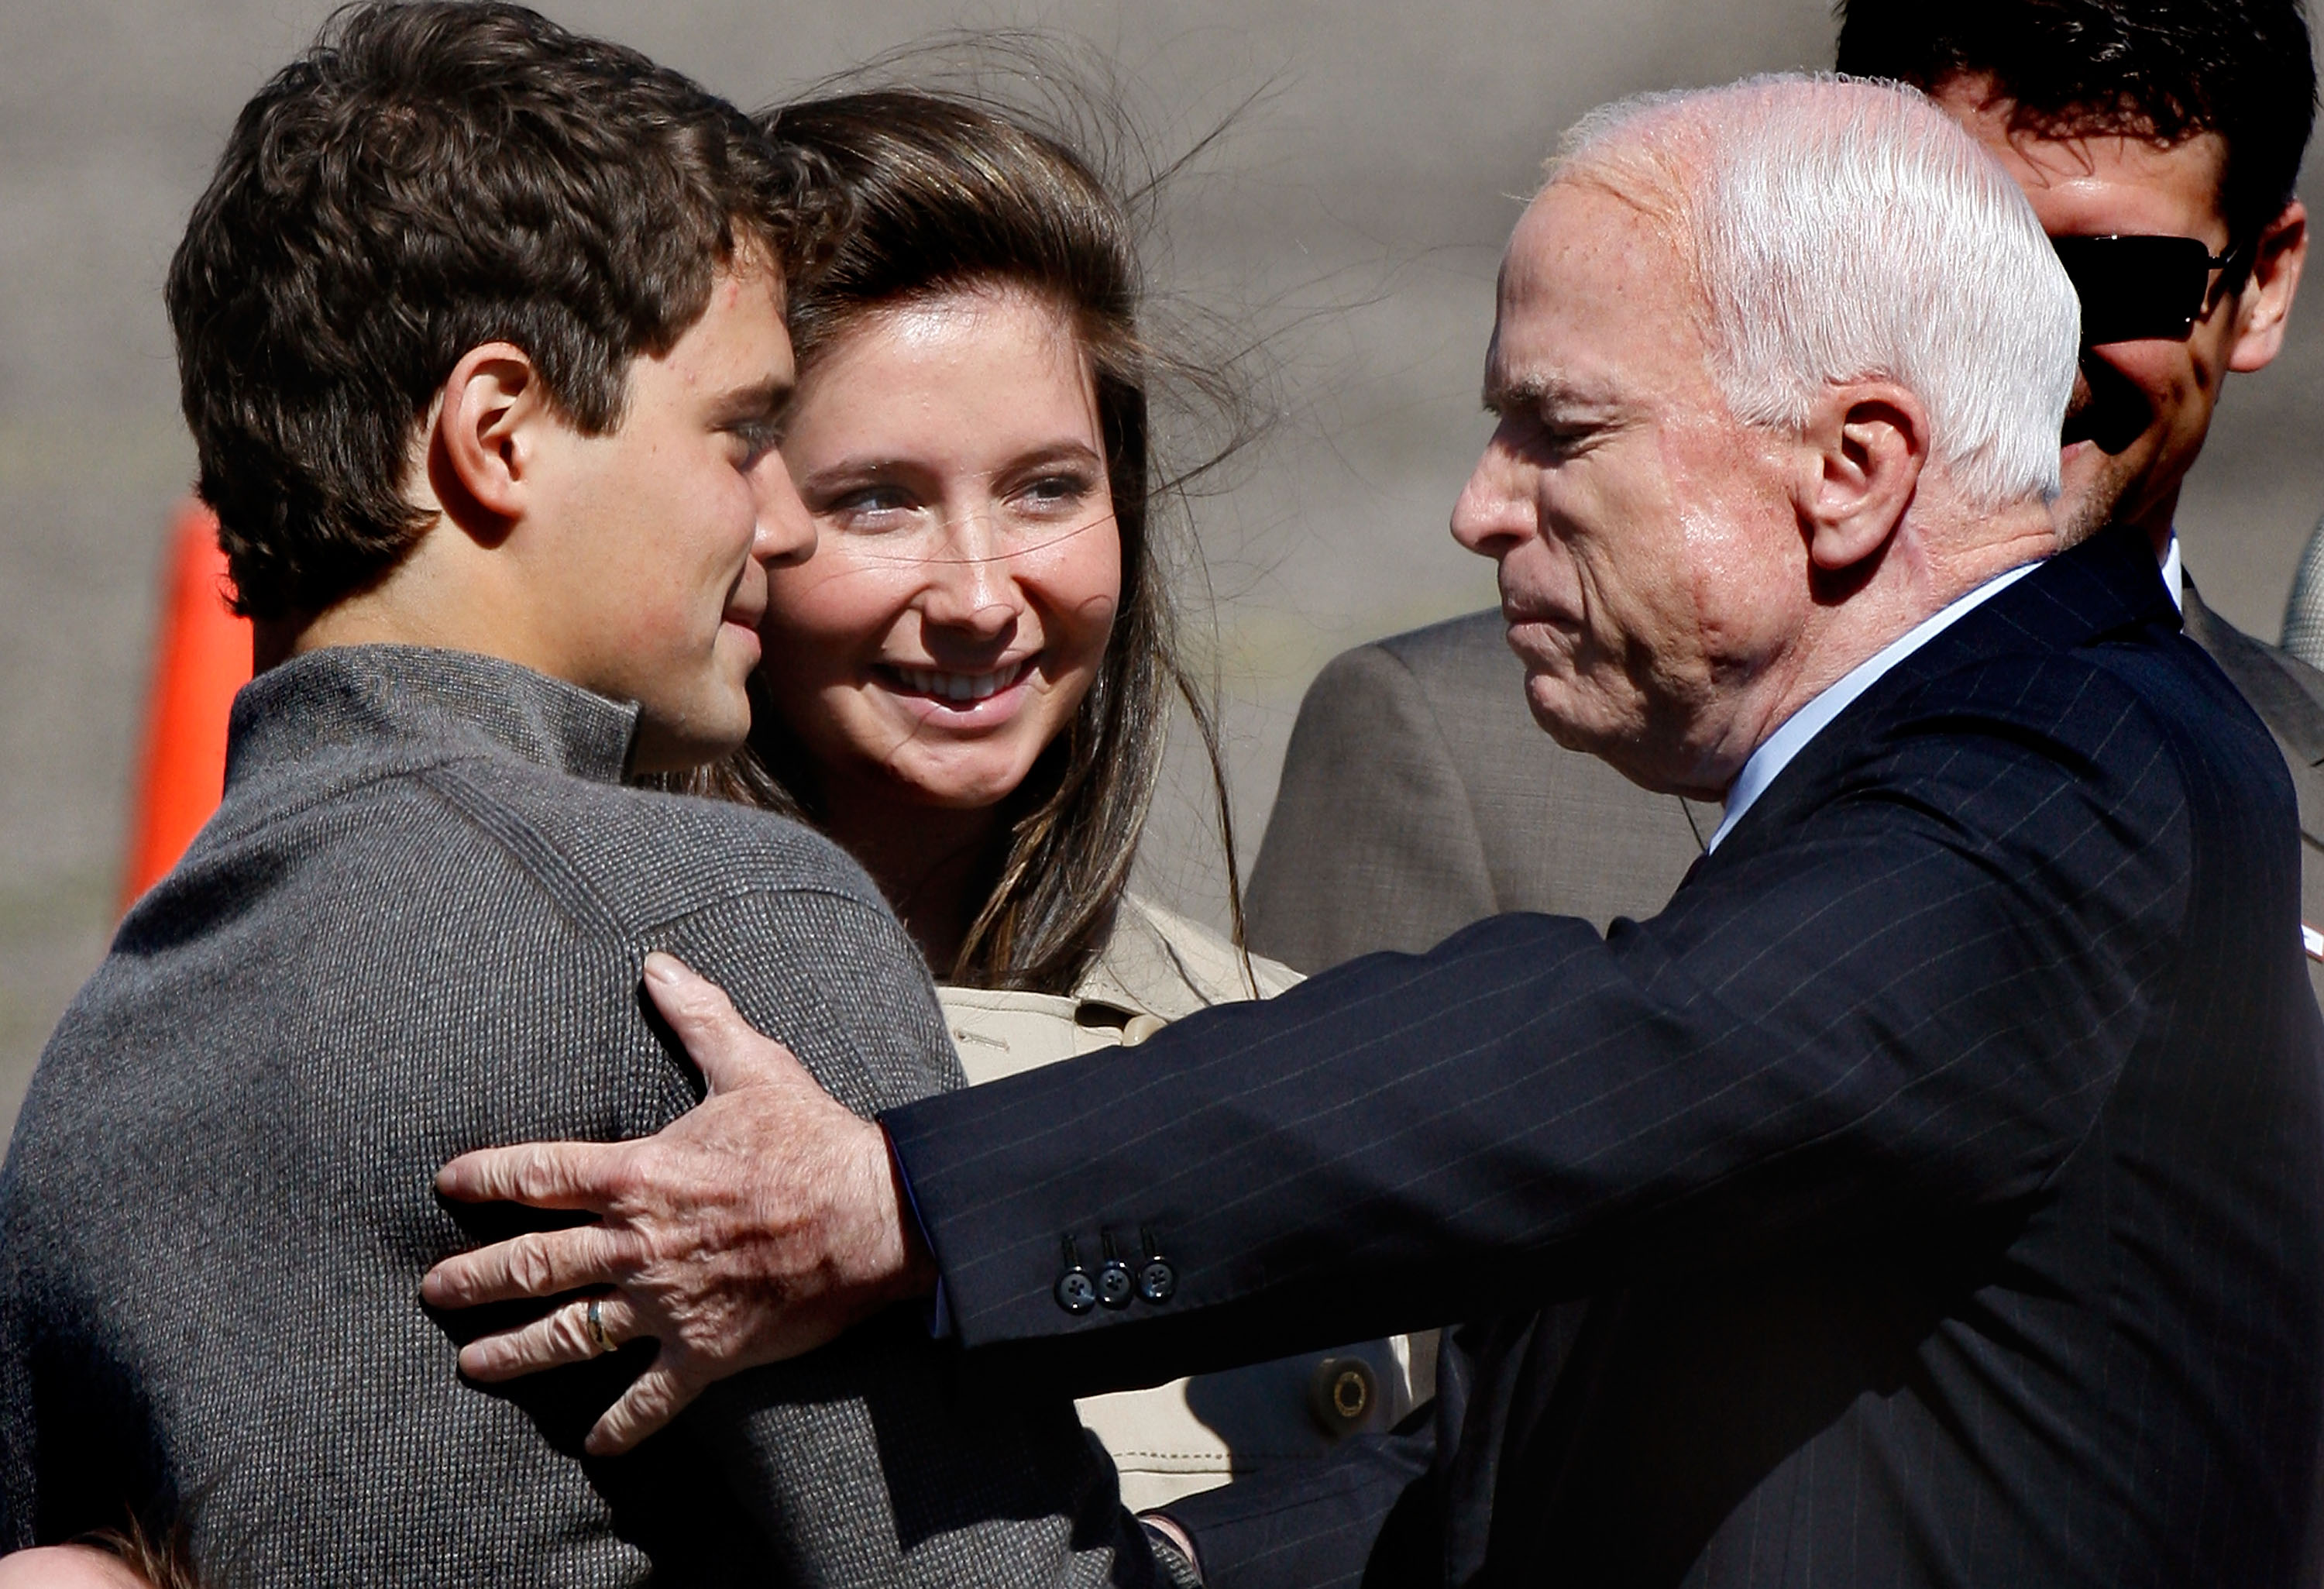 Presumptive Republican presidential nominee John McCain is greeted by Levi Johnston and his then-girlfriend Bristol Palin, daughter of vice presidential candidate and Alaska Gov. Sarah Palin at the Minneapolis-St. Paul International Airport September 3, 2008. (Scott Olson/Getty Images)